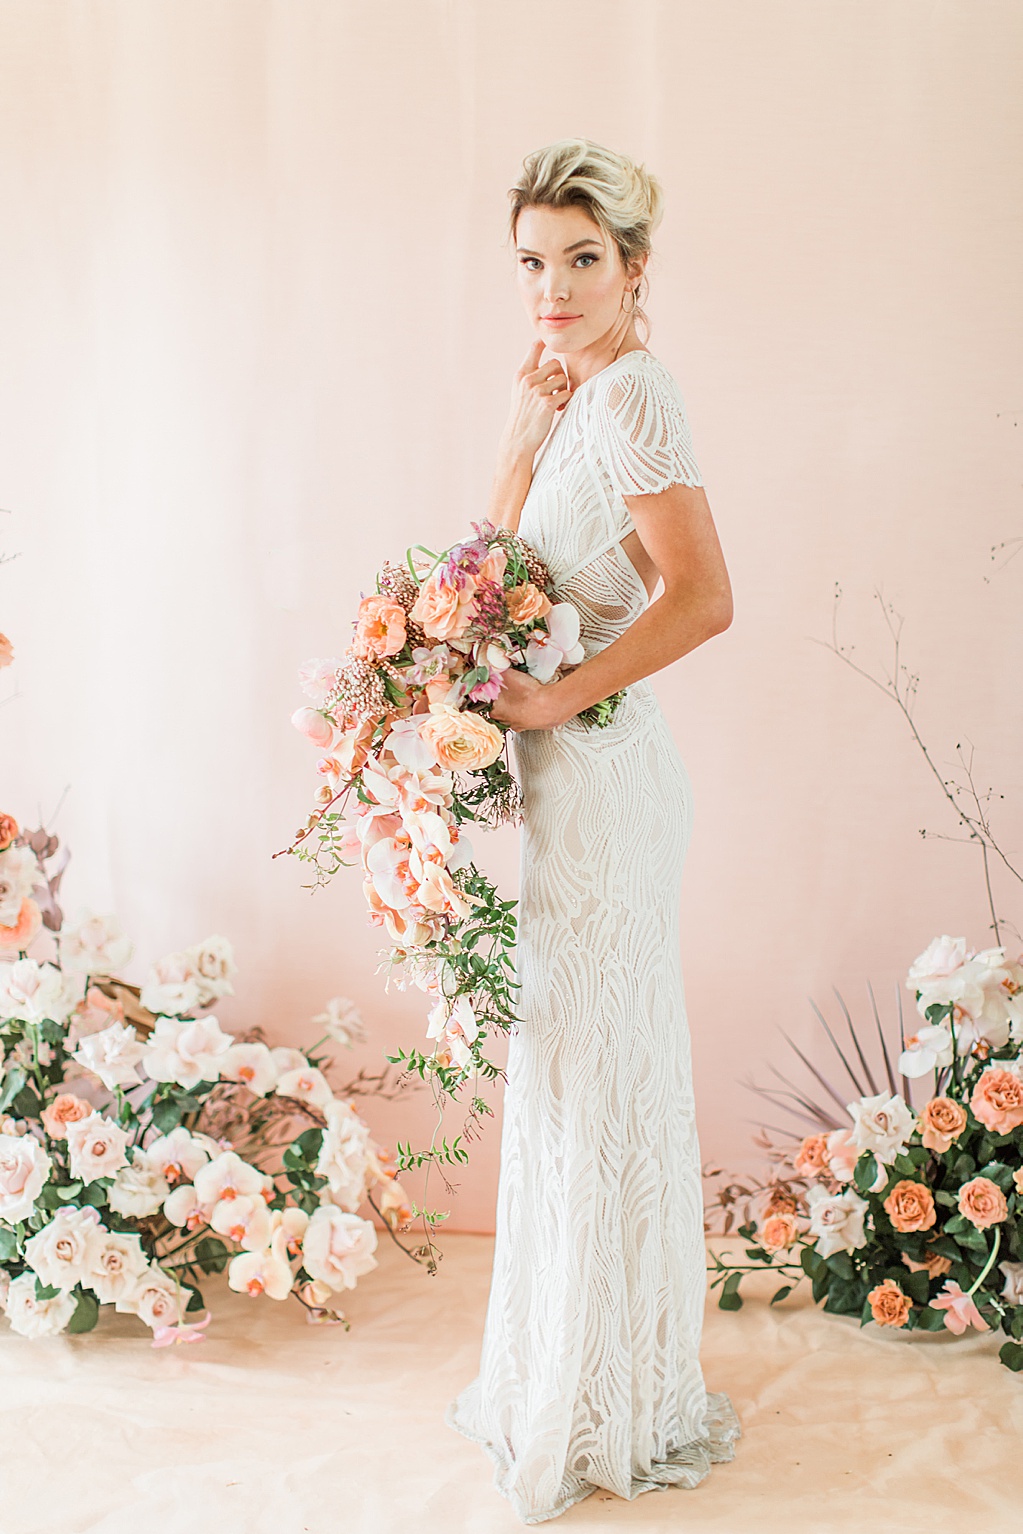 Blush mauve peach and coral wedding inspiration at Prospect House in Dripping Springs Texas wedding venue by Allison Jeffers Photography 0035